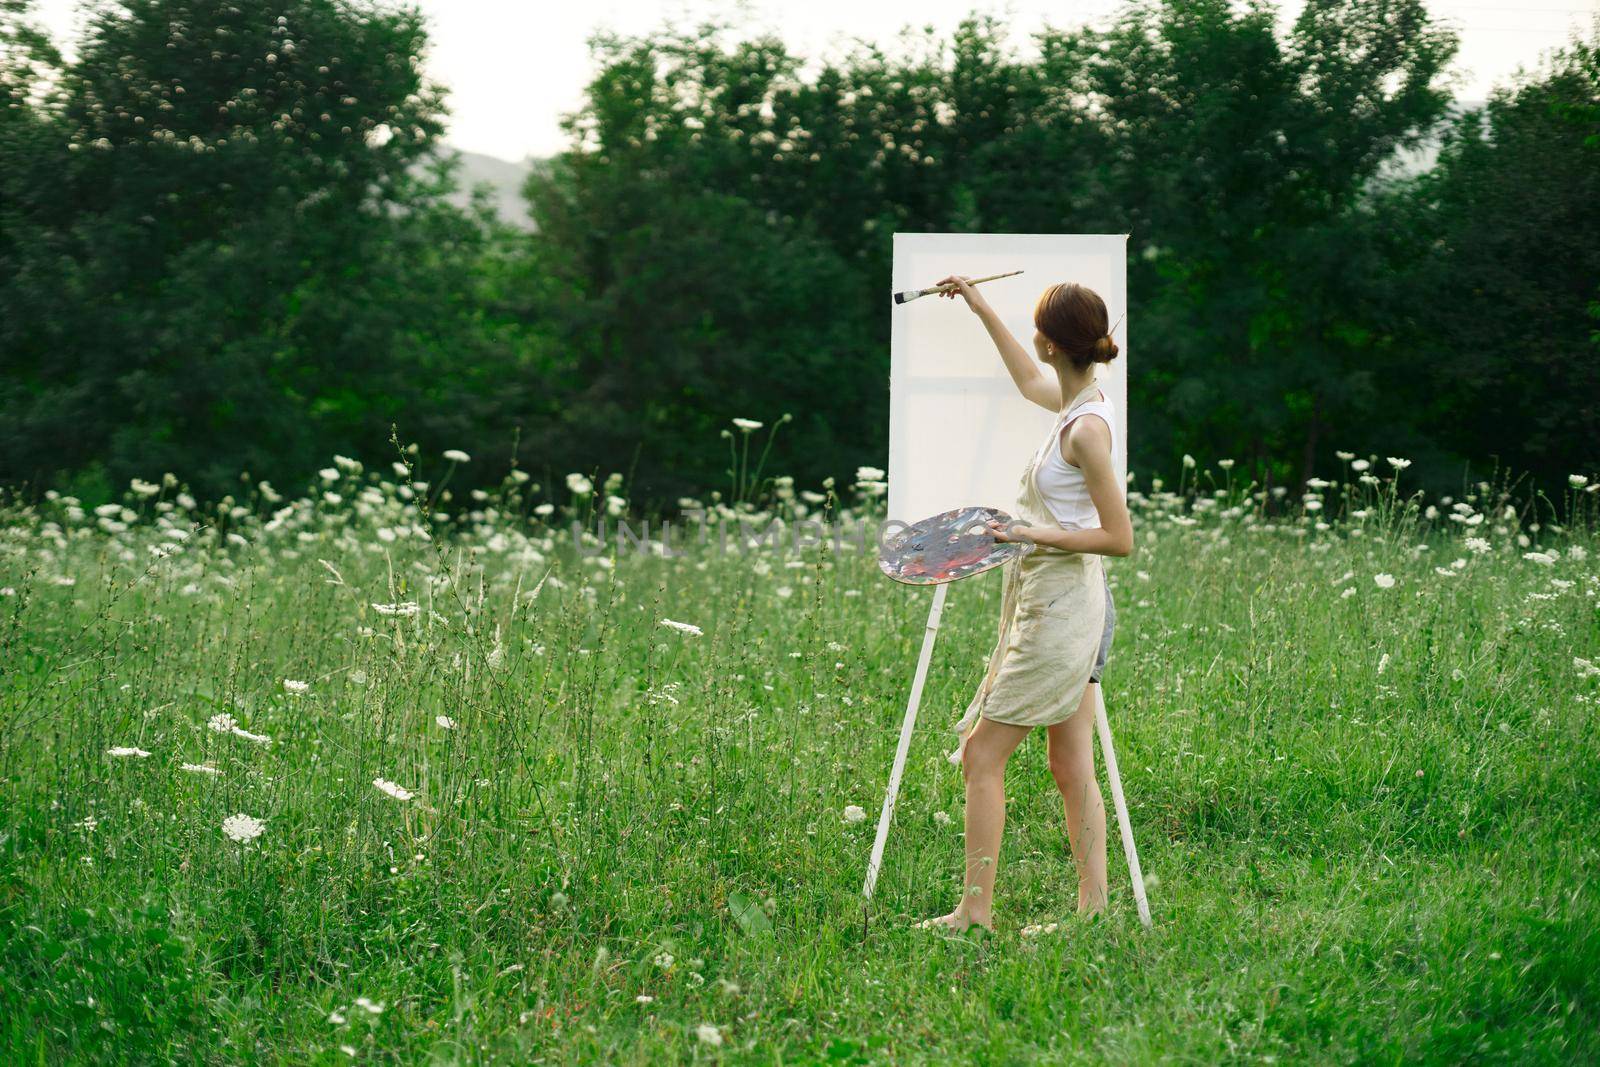 artist in nature painting a picture creative landscape back view. High quality photo